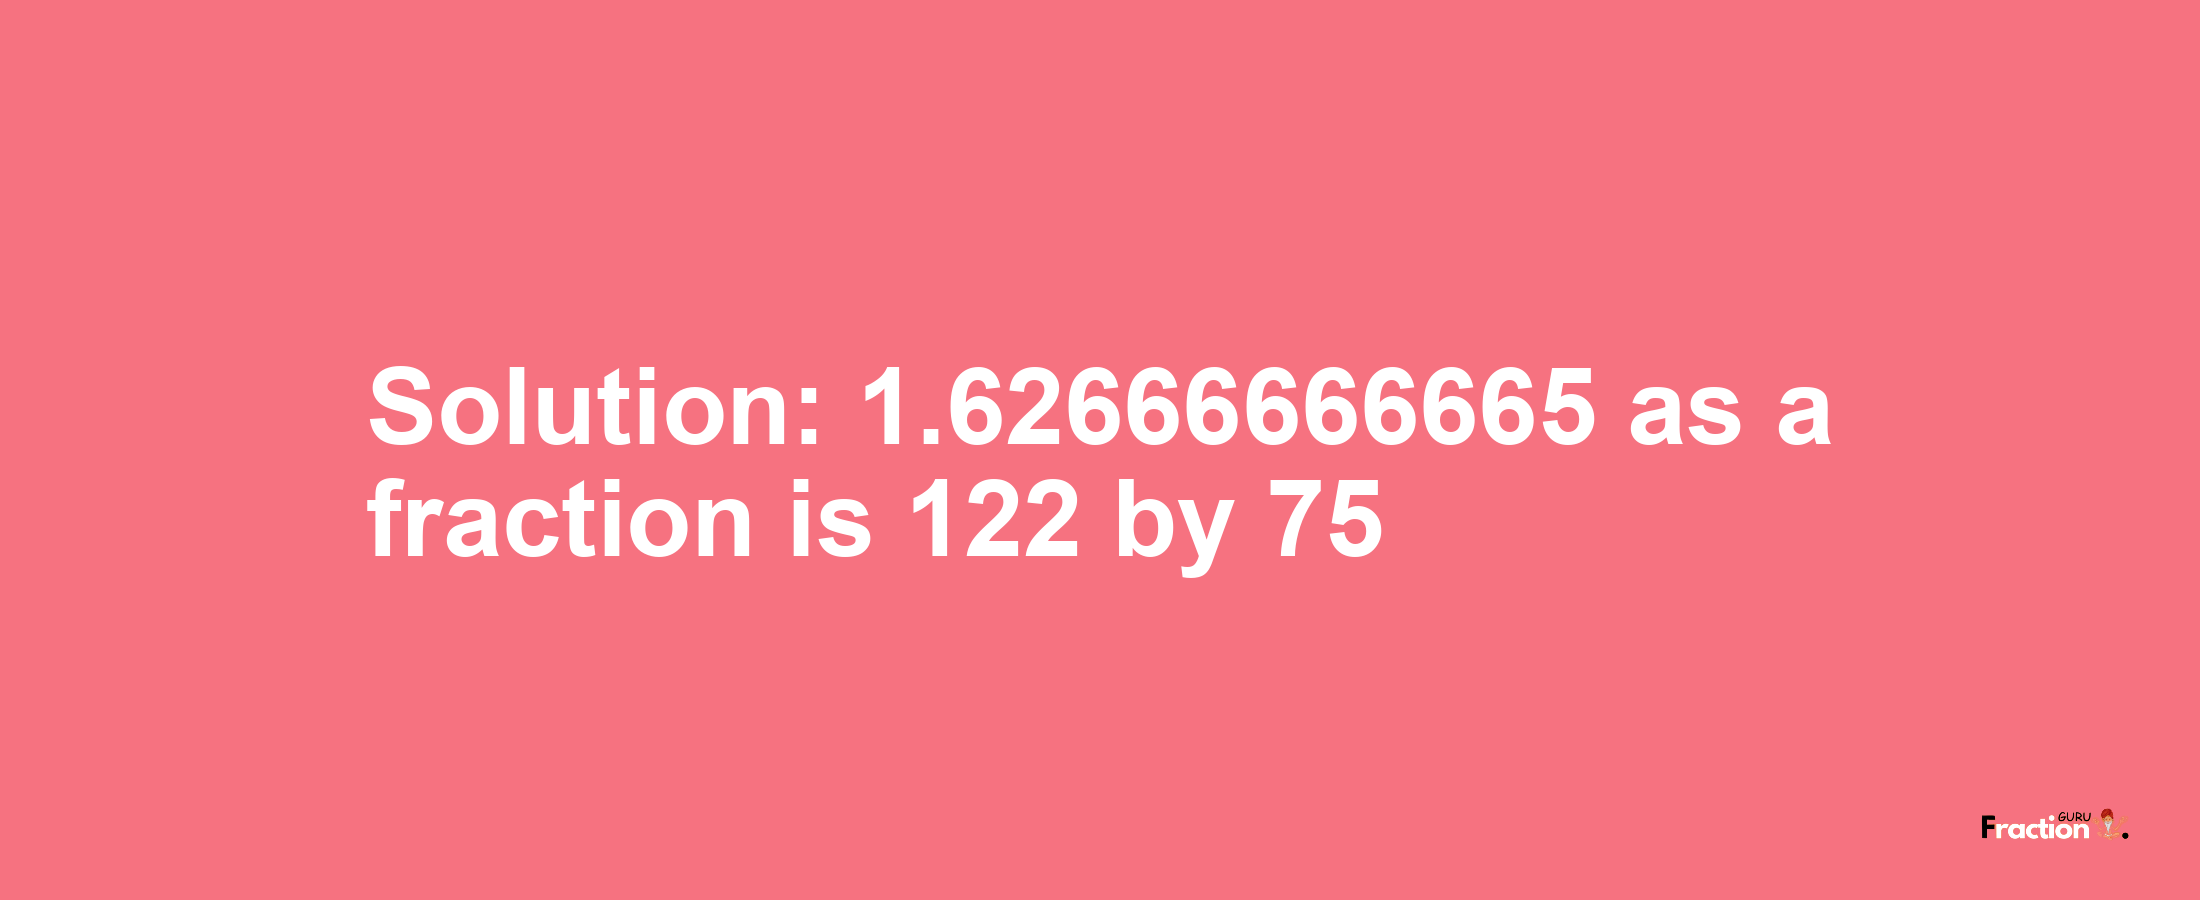 Solution:1.62666666665 as a fraction is 122/75